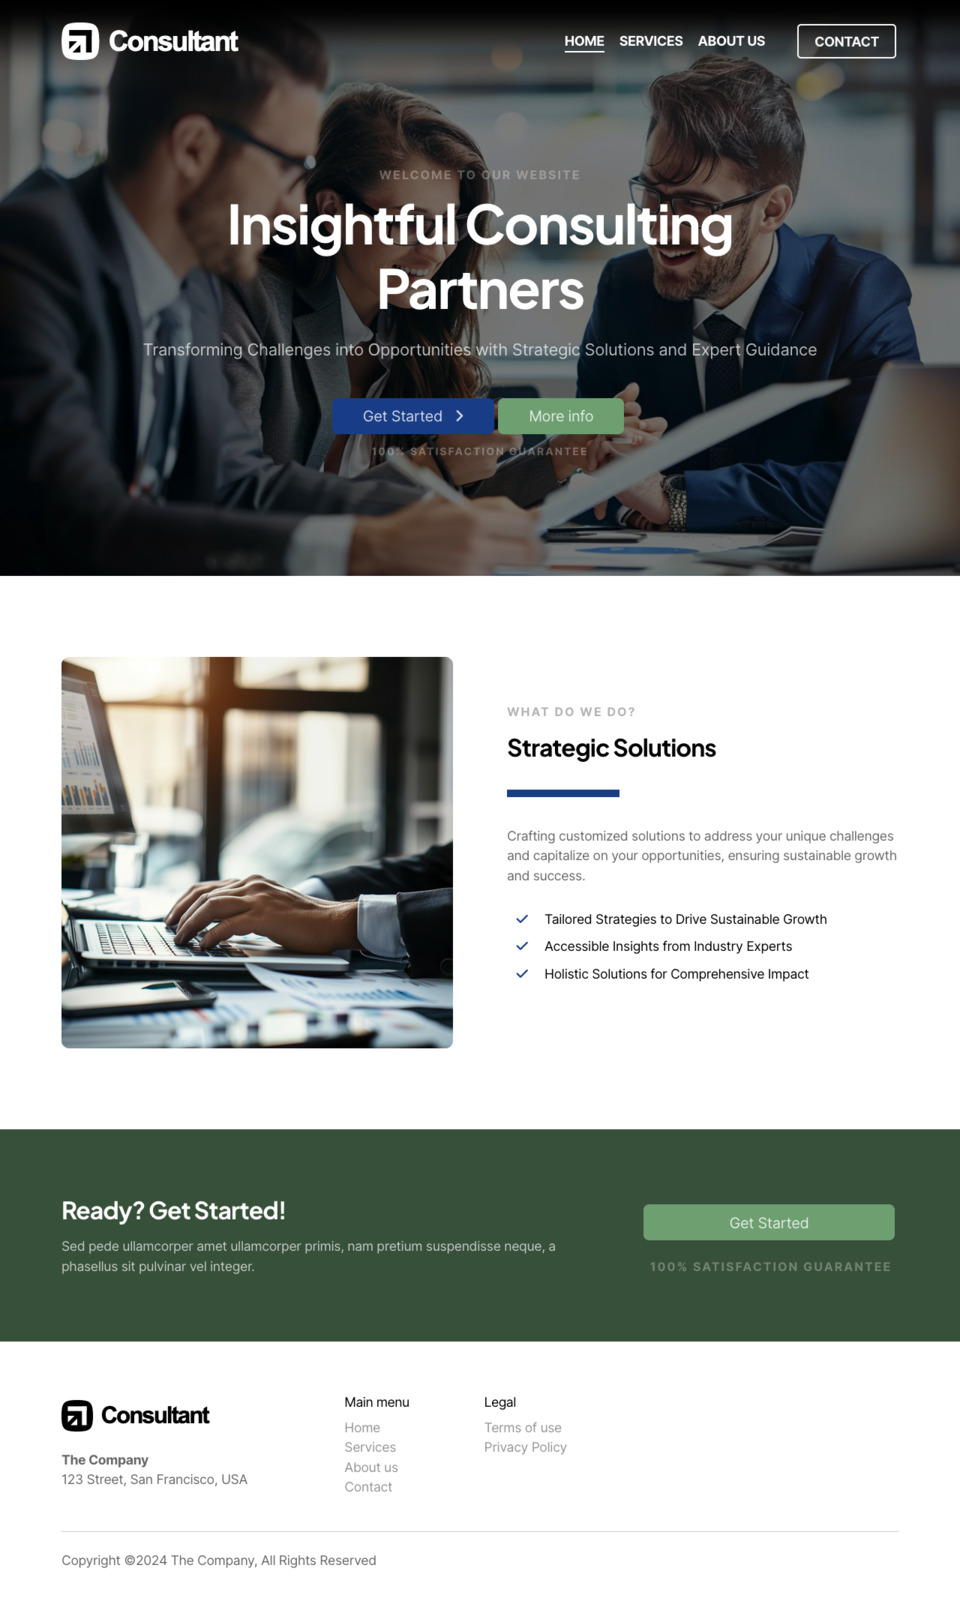 Consultant 2 Website Template - Ideal for small businesses, consultants, advisors, managers, and professionals looking to create a personalized website with ease.